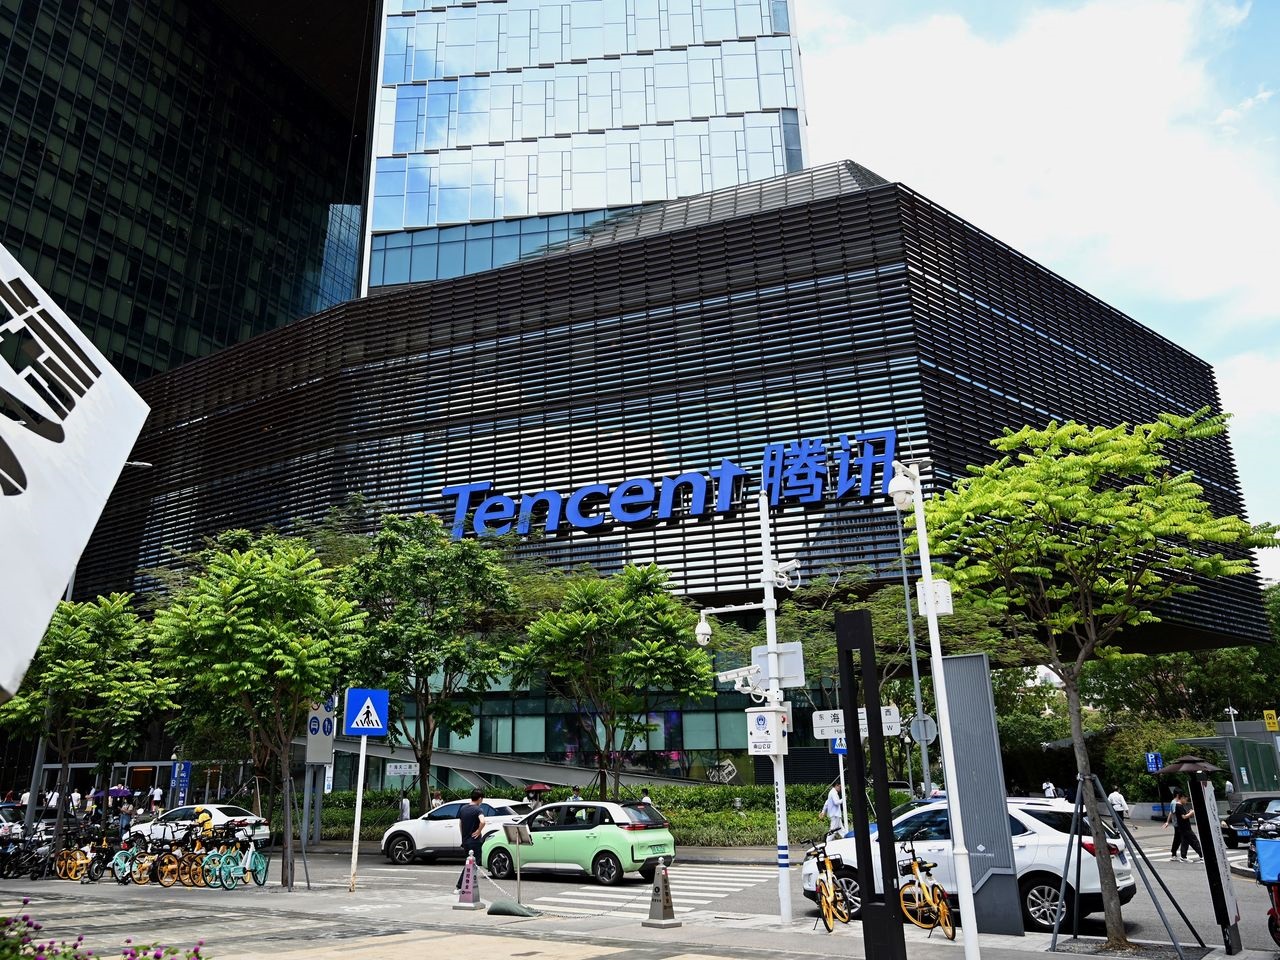 Bloomberg: Tencent Fails to Win Game Approval as Sector Concerns Persist